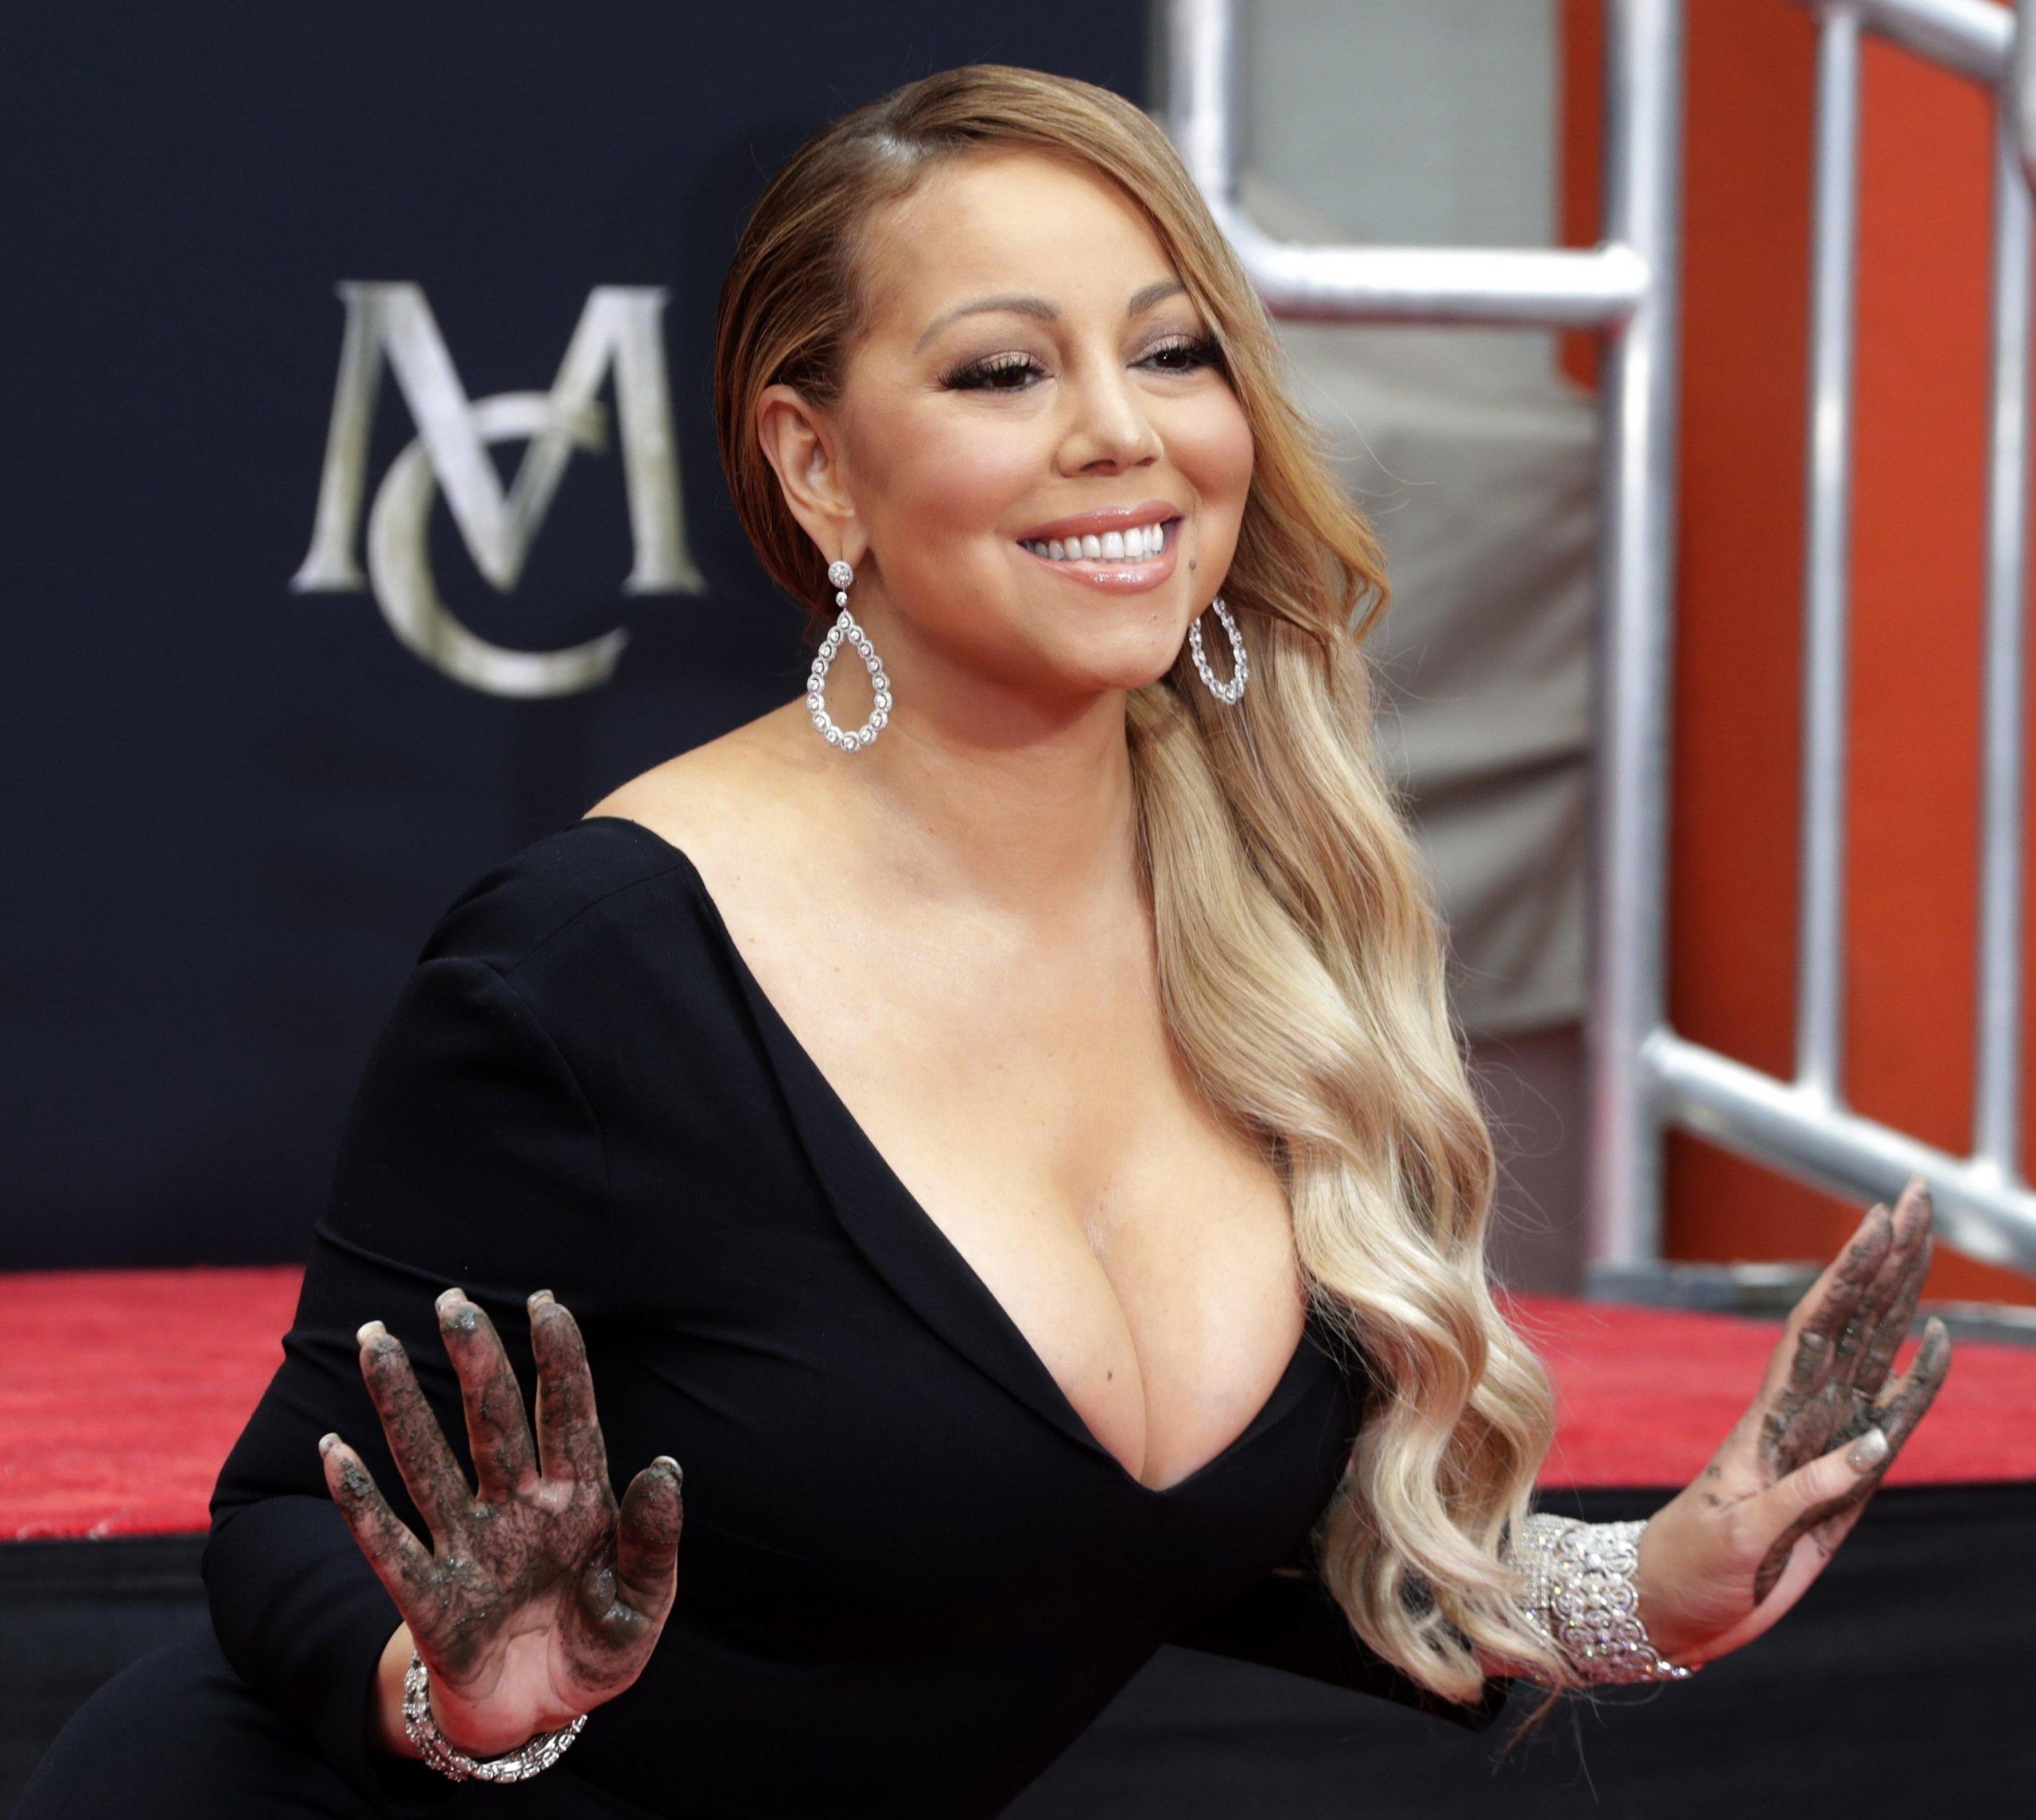 Mariah Carey honored with Hollywood handprint ceremony